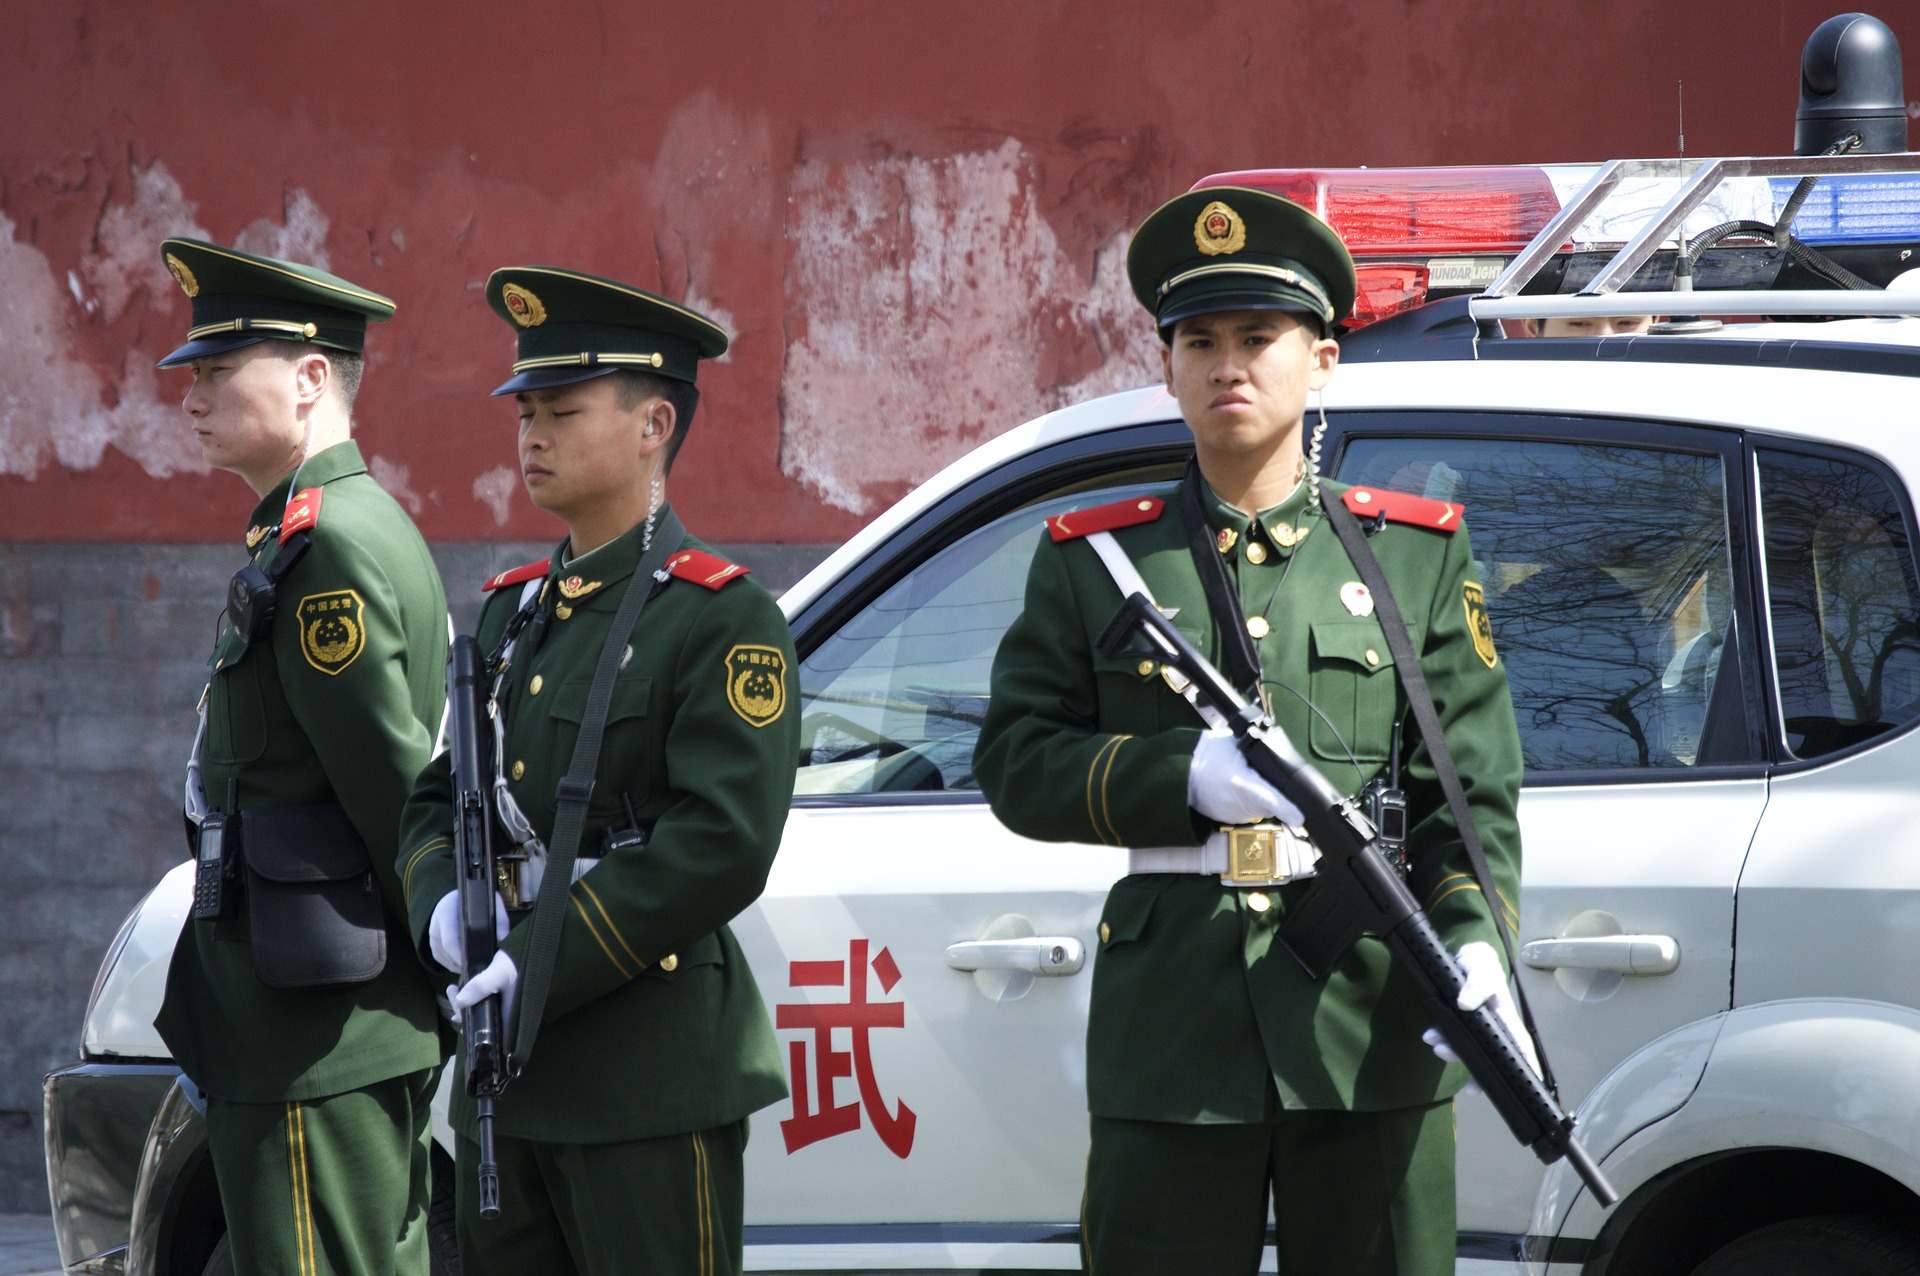 a group of men in military uniforms holding guns